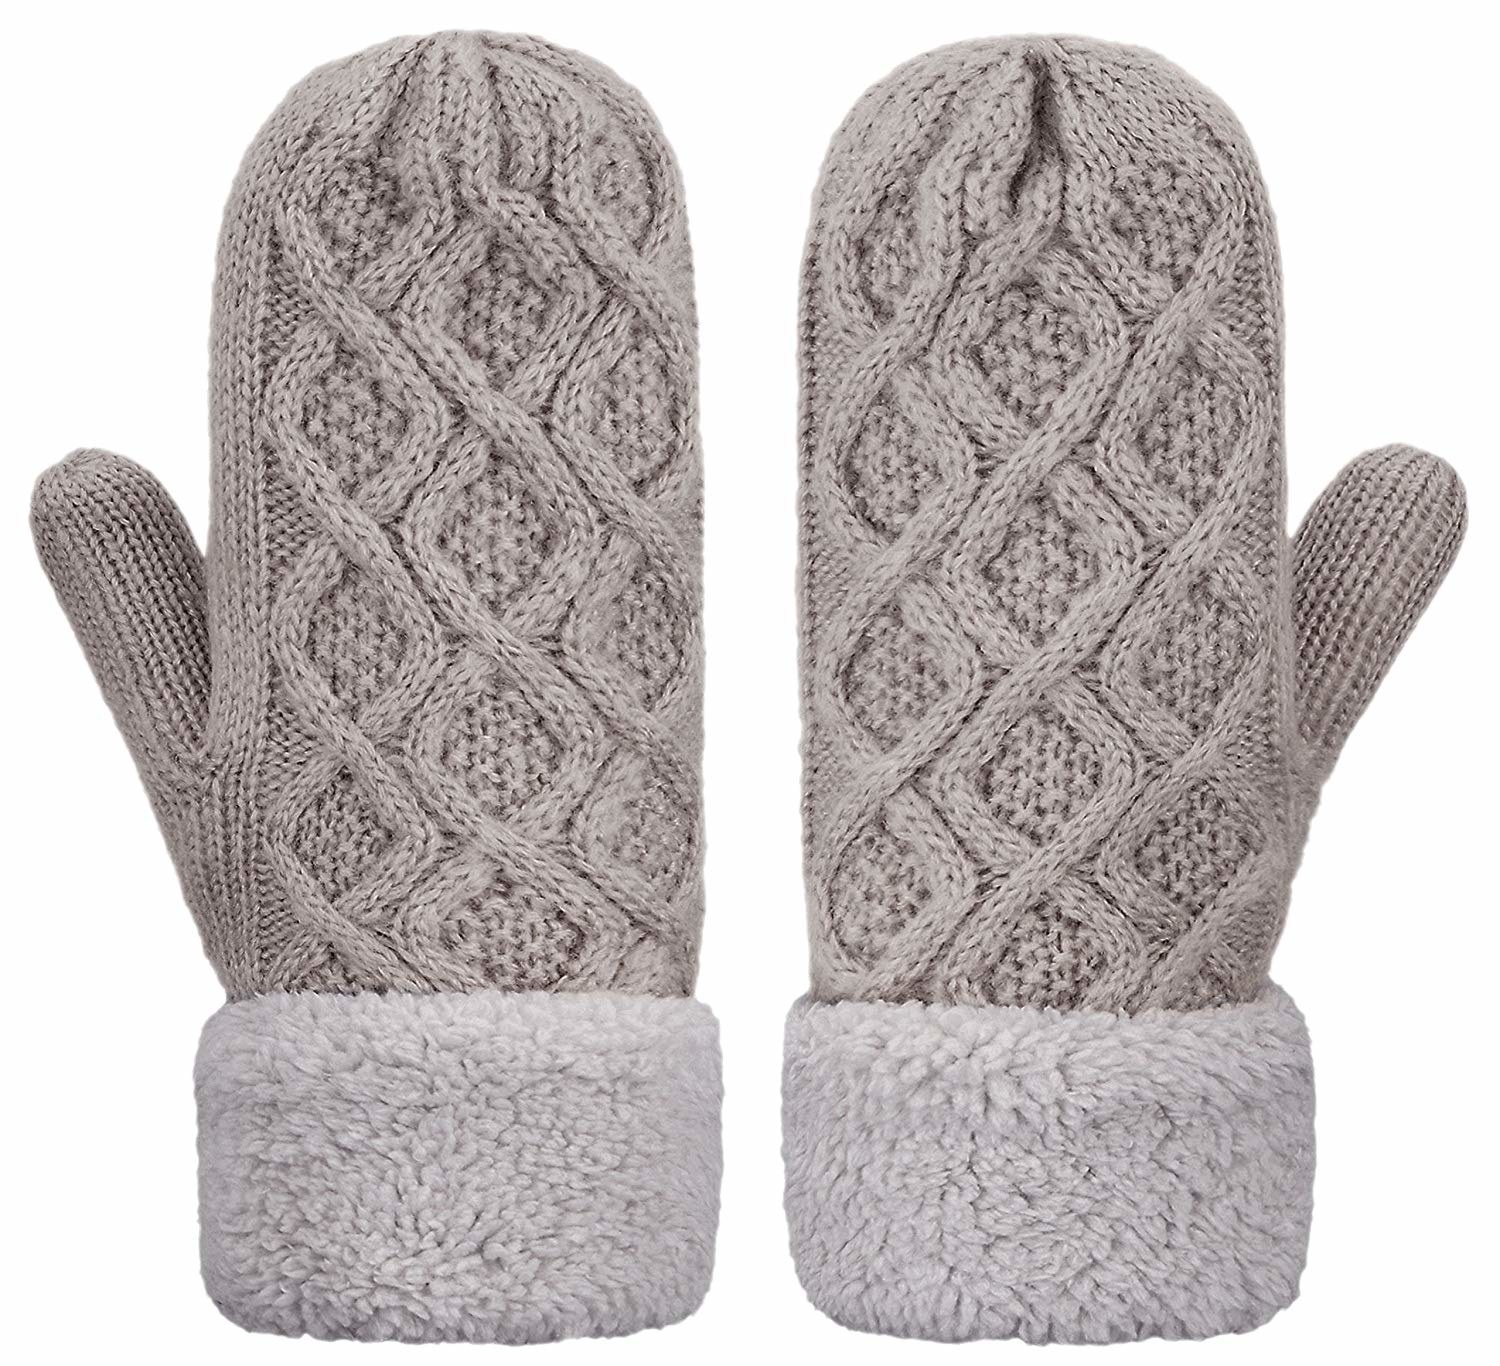 17 Of The Best Mittens You Can Get On Amazon In 2018